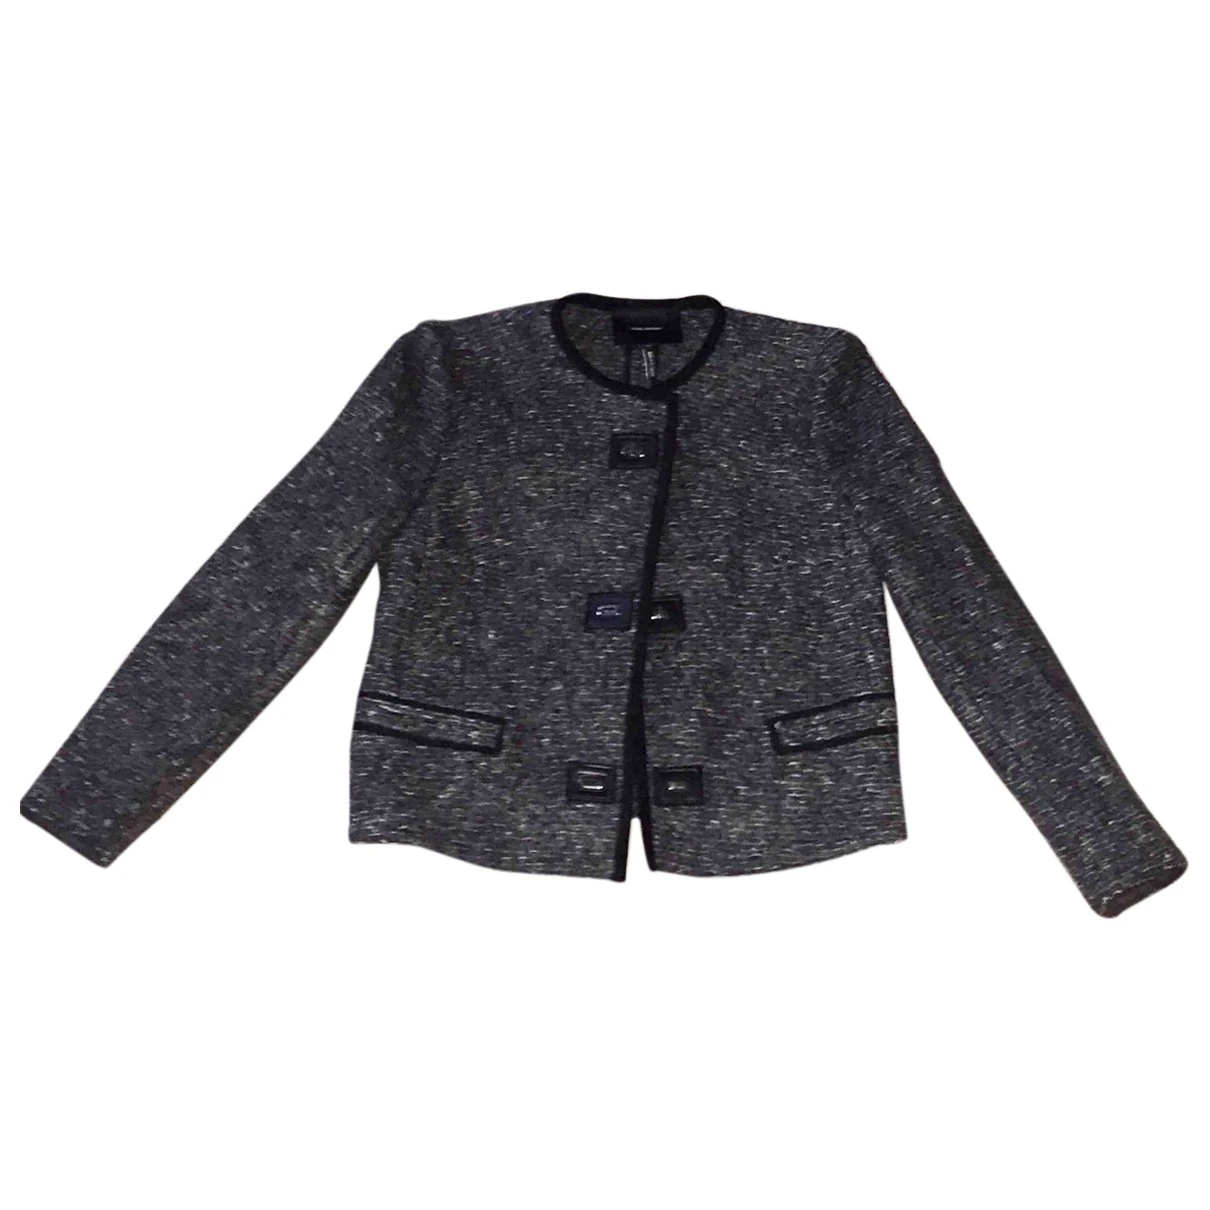 clothing Isabel Marant jackets for Female Wool 38 FR. Used condition